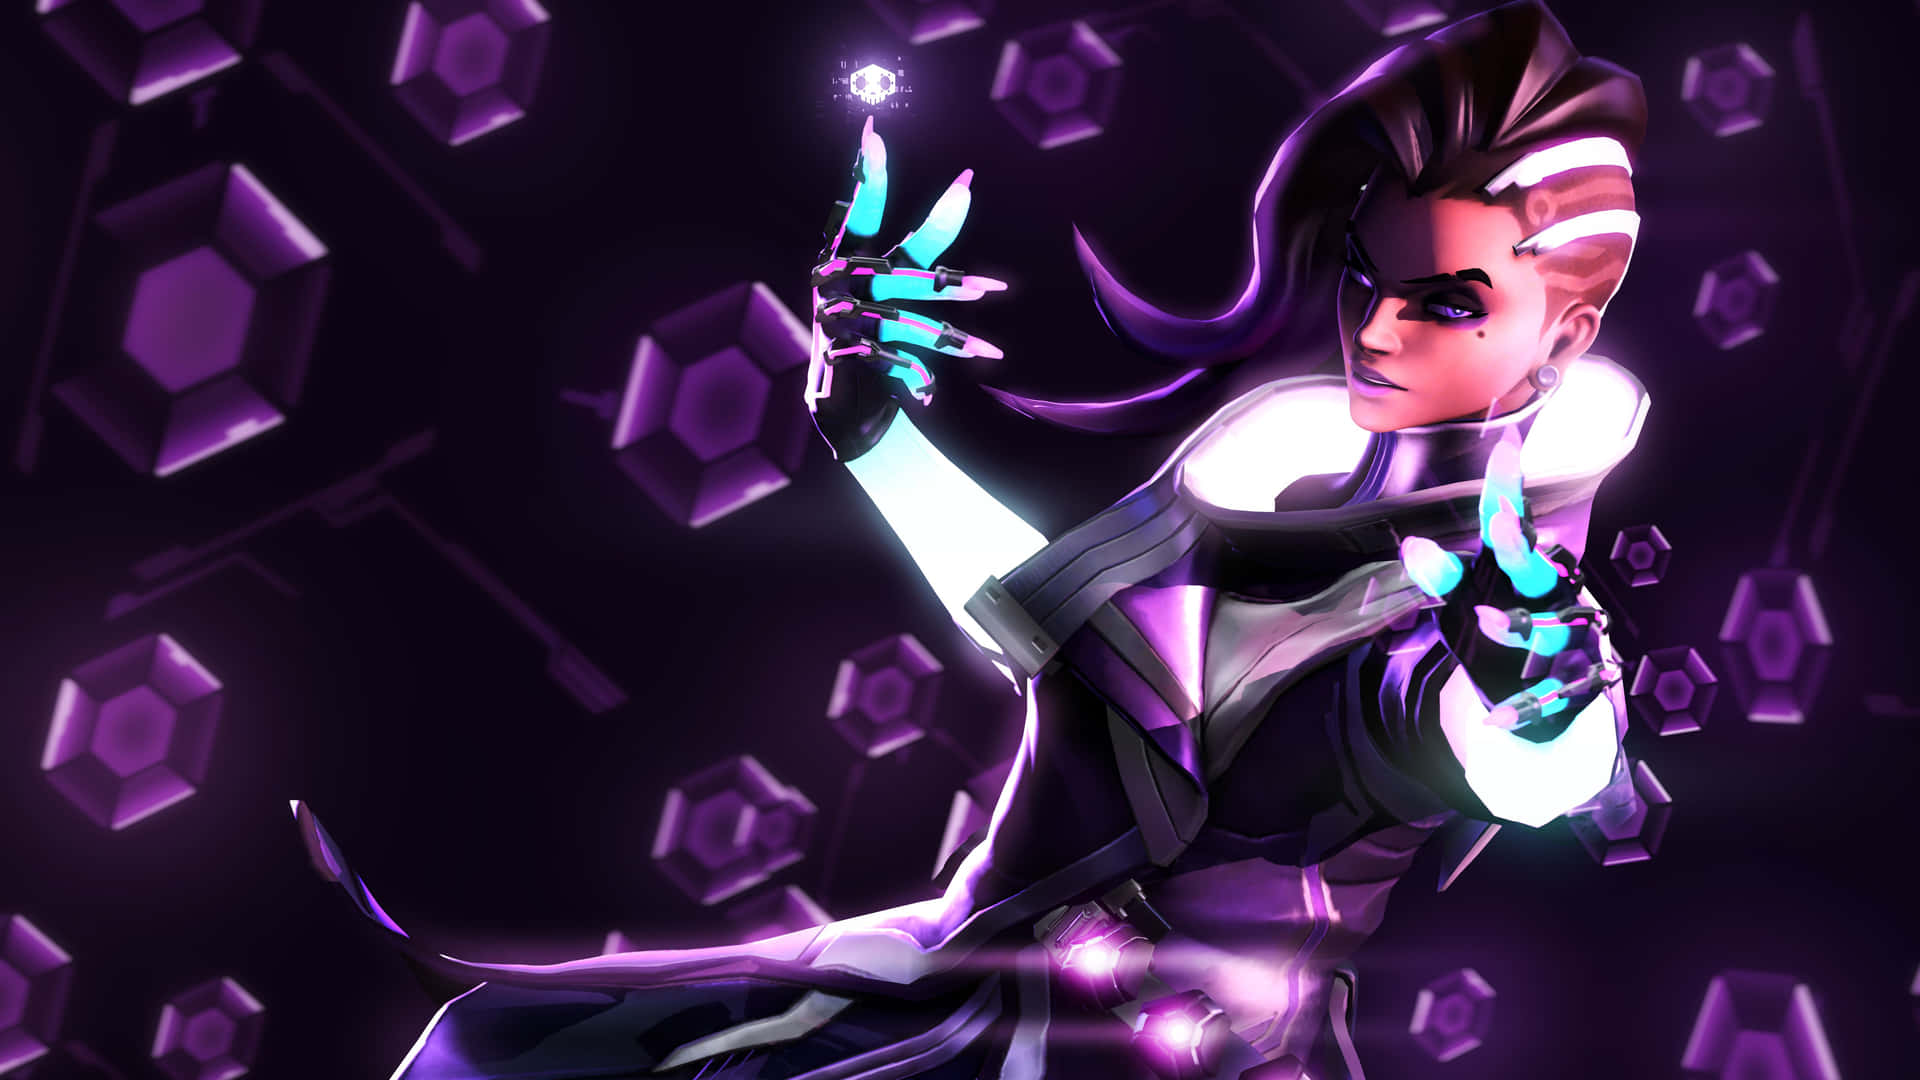 Sombra unleashes her hacking expertise in Overwatch Wallpaper